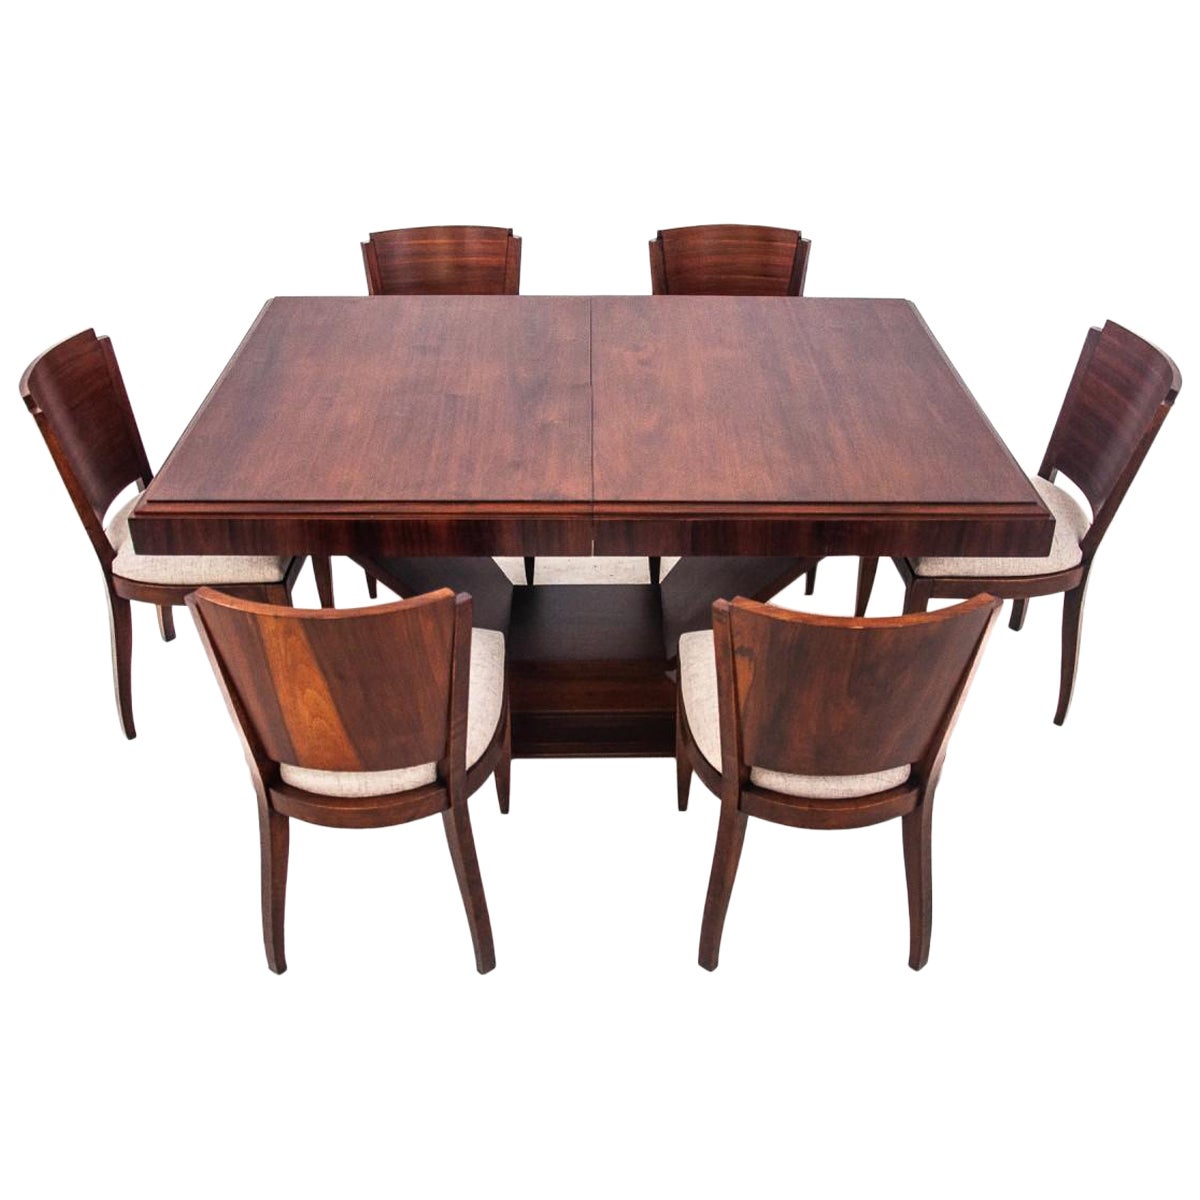 French Art Deco Louis Majorelle Walnut Dining Table with Chairs For Sale